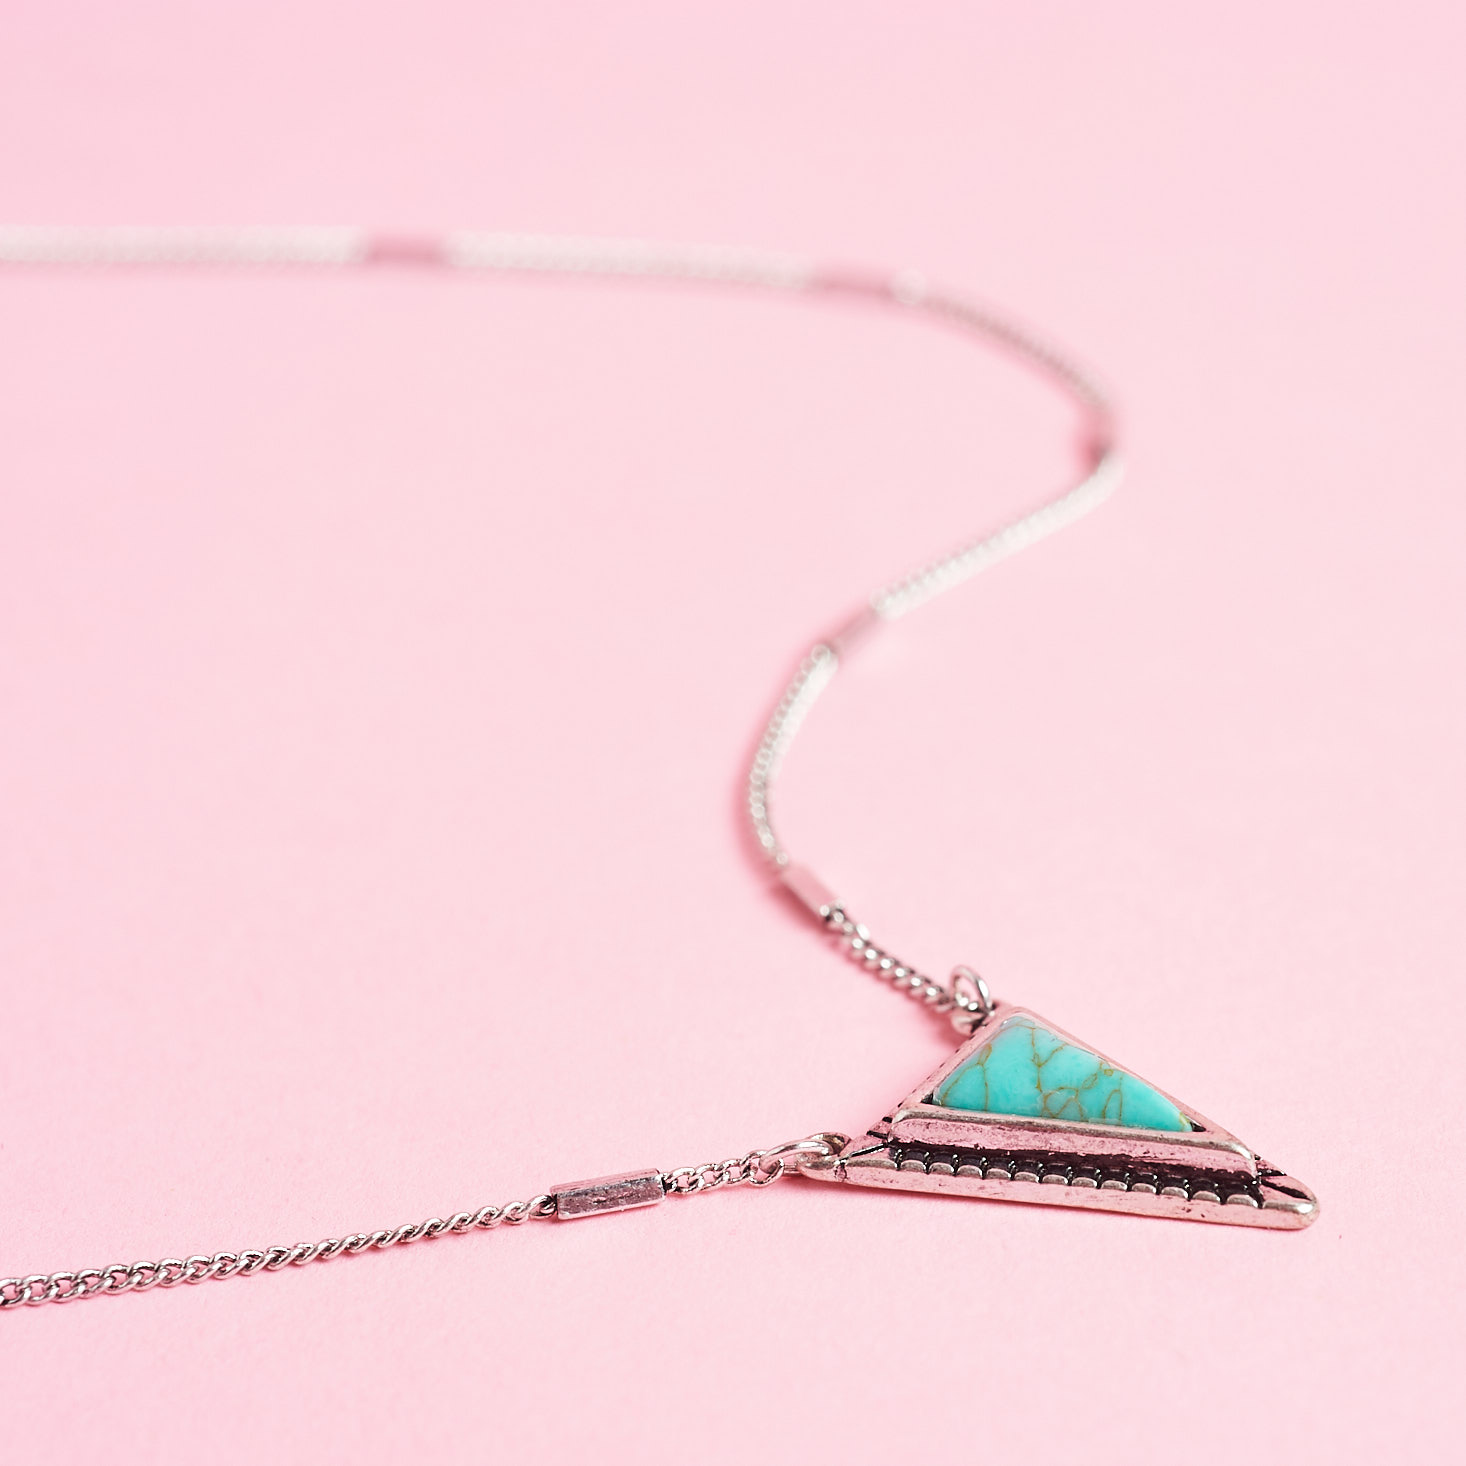 Goddess Provisions Divine Feminine May 2019 subscription box review necklace side view